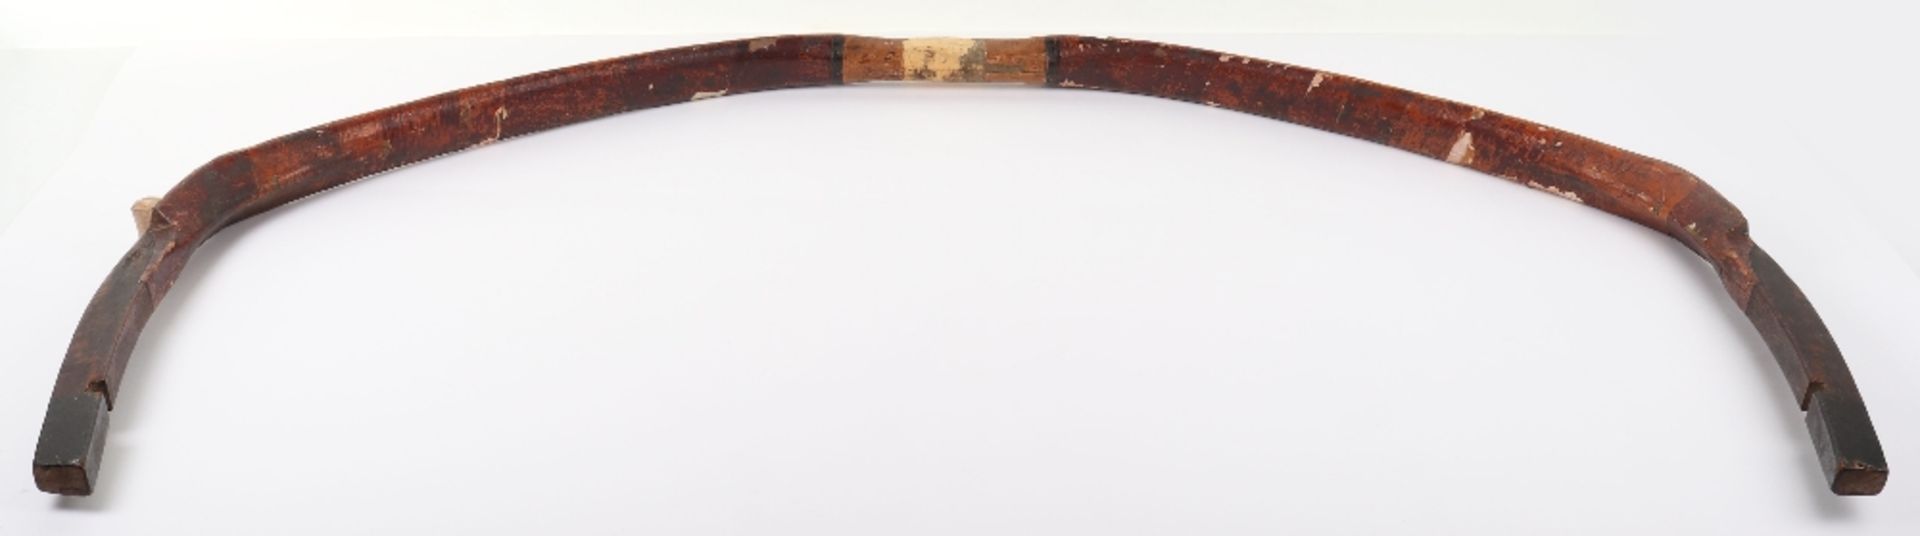 Unusually Large Chinese Compound Bow, 19th Century or Earlier - Image 2 of 18